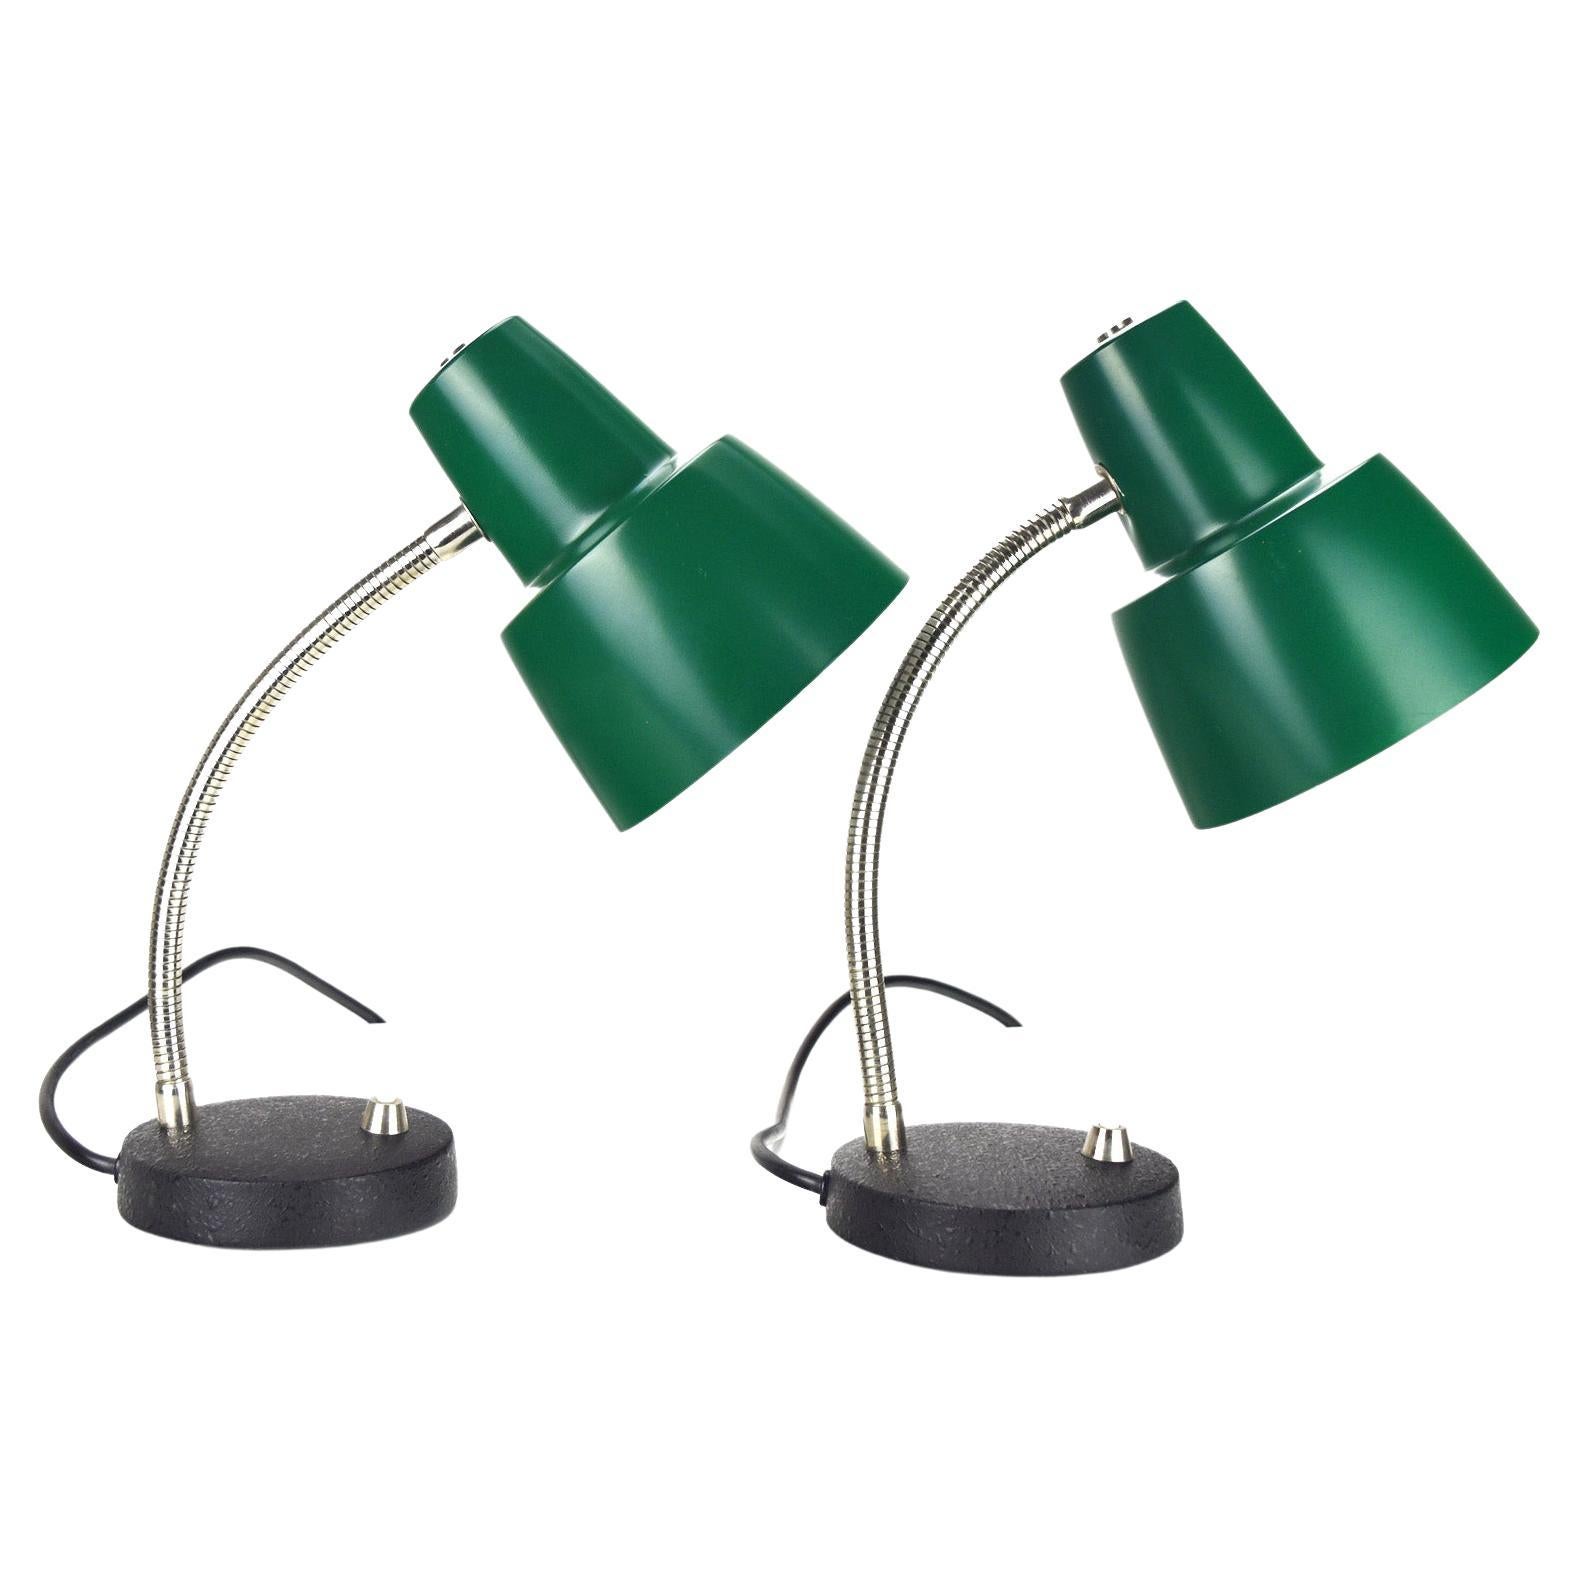 Vintage Pair of Bed Side Table Lamps by Hillebrand 1960s German Green Lacquered For Sale